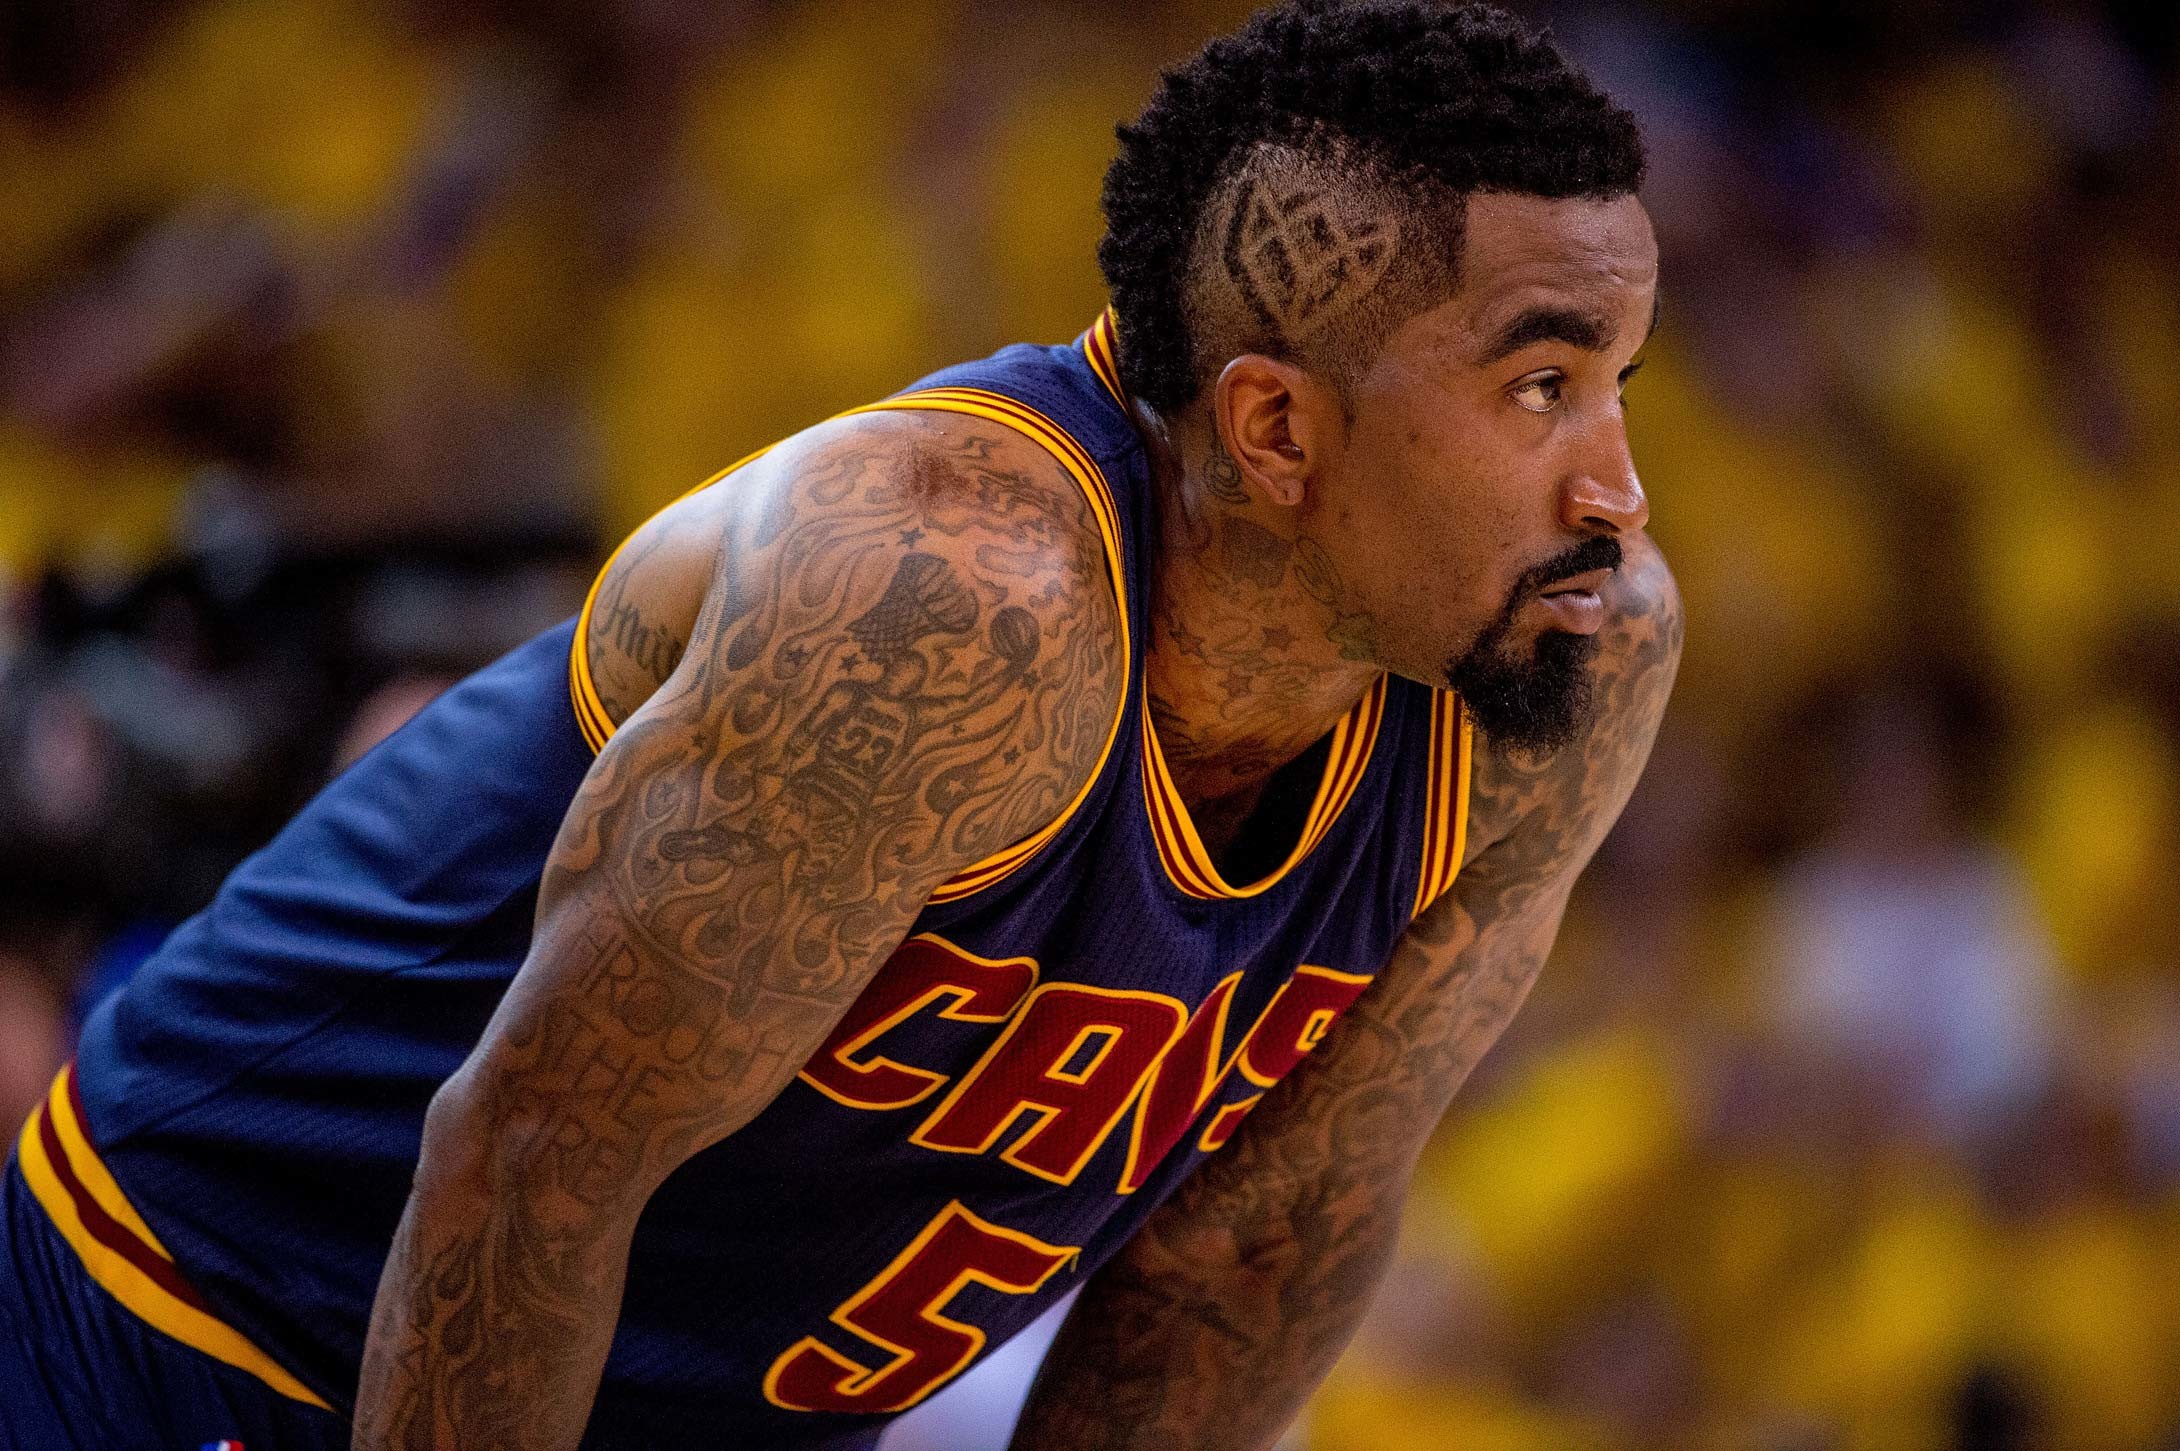 2180x1451 J.R. Smith's hairdo was flashier than his game in the Finals opener.